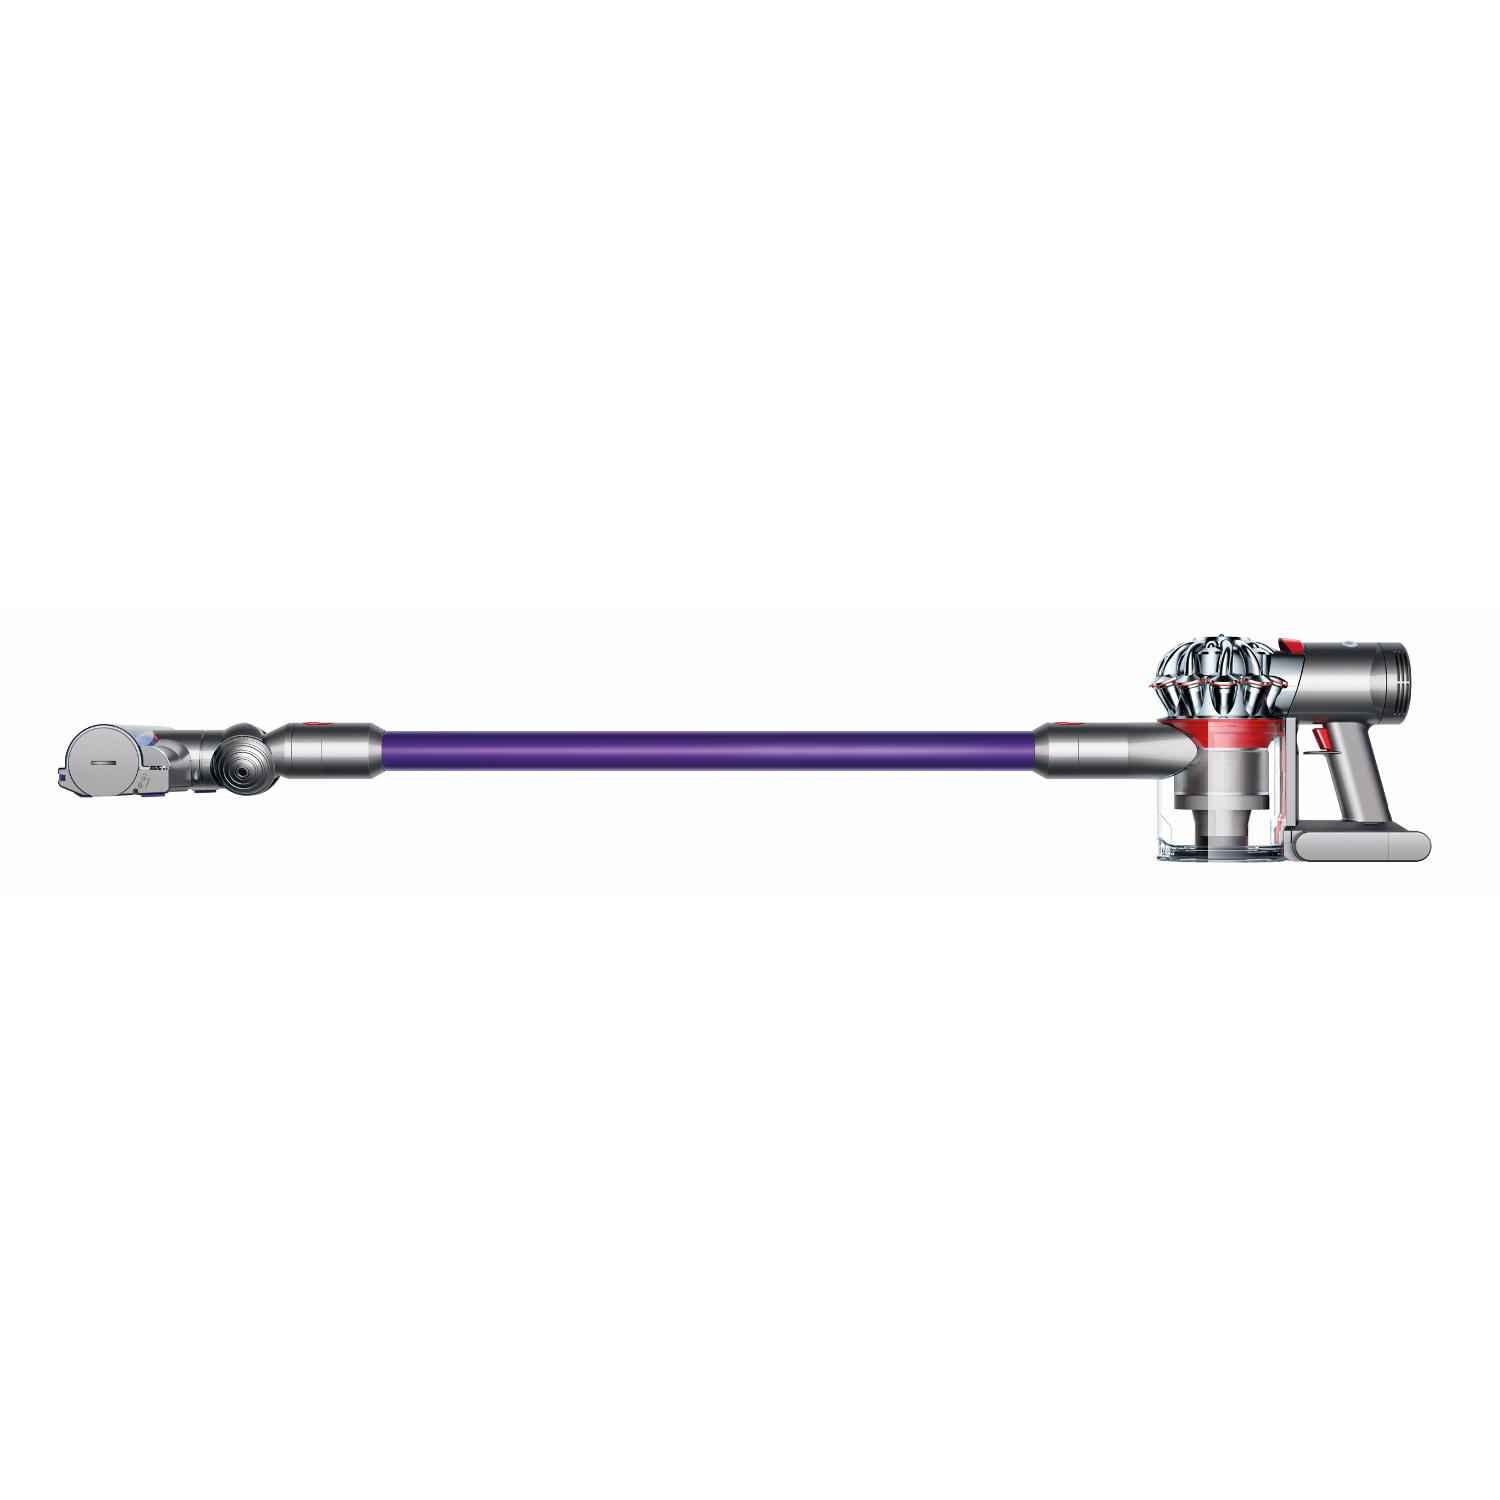 Dyson V7ANIMAL Cordless Vacuum Cleaner - 30 Minute Run Time - 3